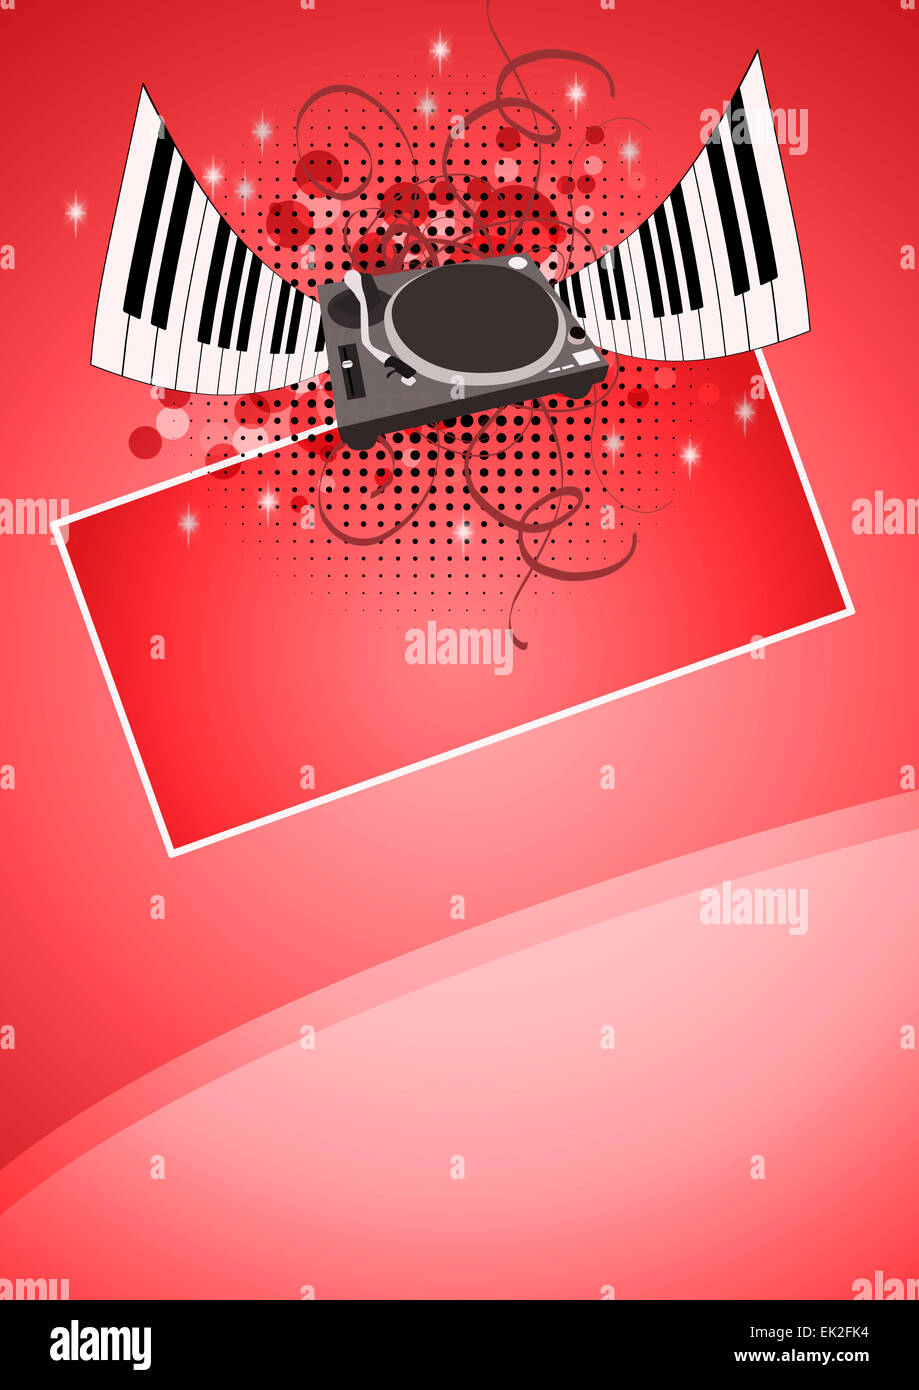 DJ and piano music poster background with space Stock Photo - Alamy